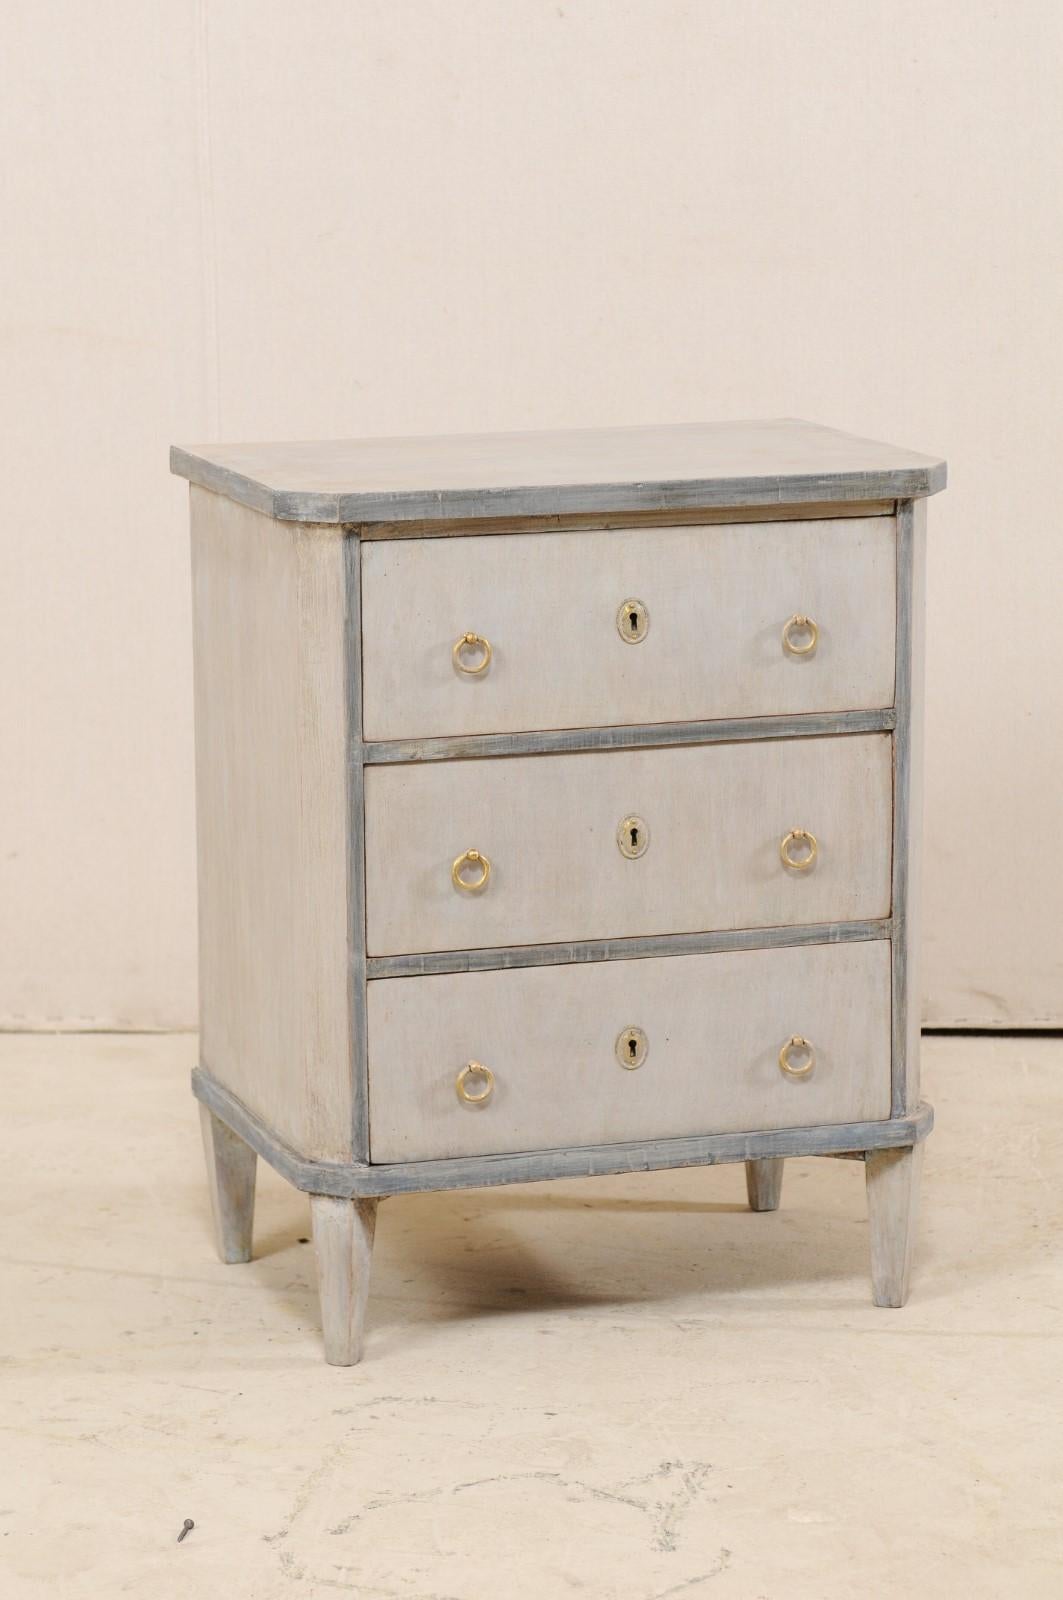 A Swedish period Gustavian petite-sized chest from the early 19th century. This antique chest from Sweden, in typical Gustavian style, features a simple, clean design with a slightly overhanging top, whose front corners are shaped to mimic the